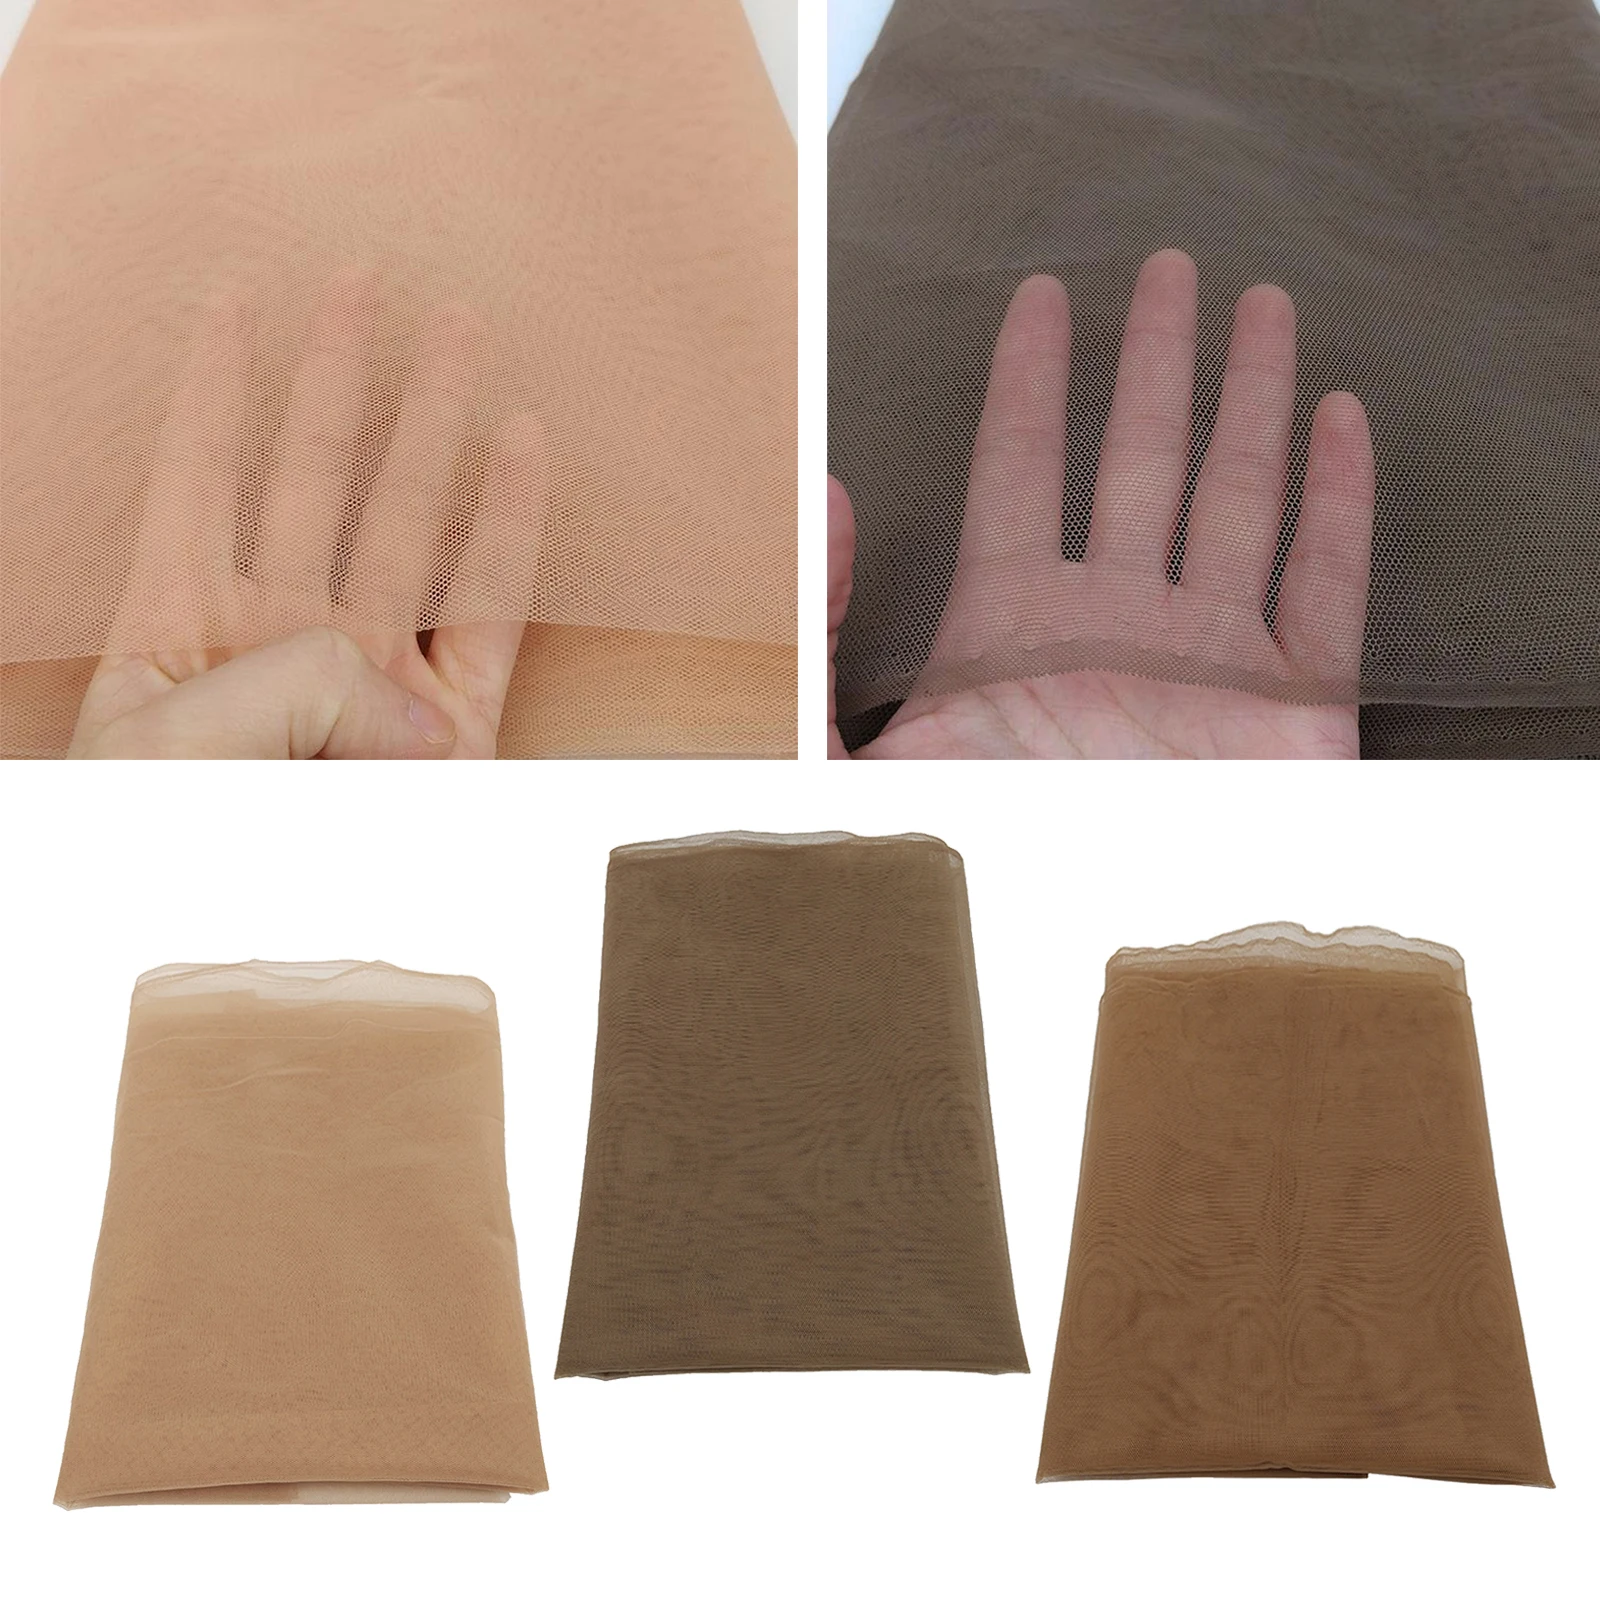  for Making Lace Closure Caps Toupee, Foundation Accessories- 5 inch Width